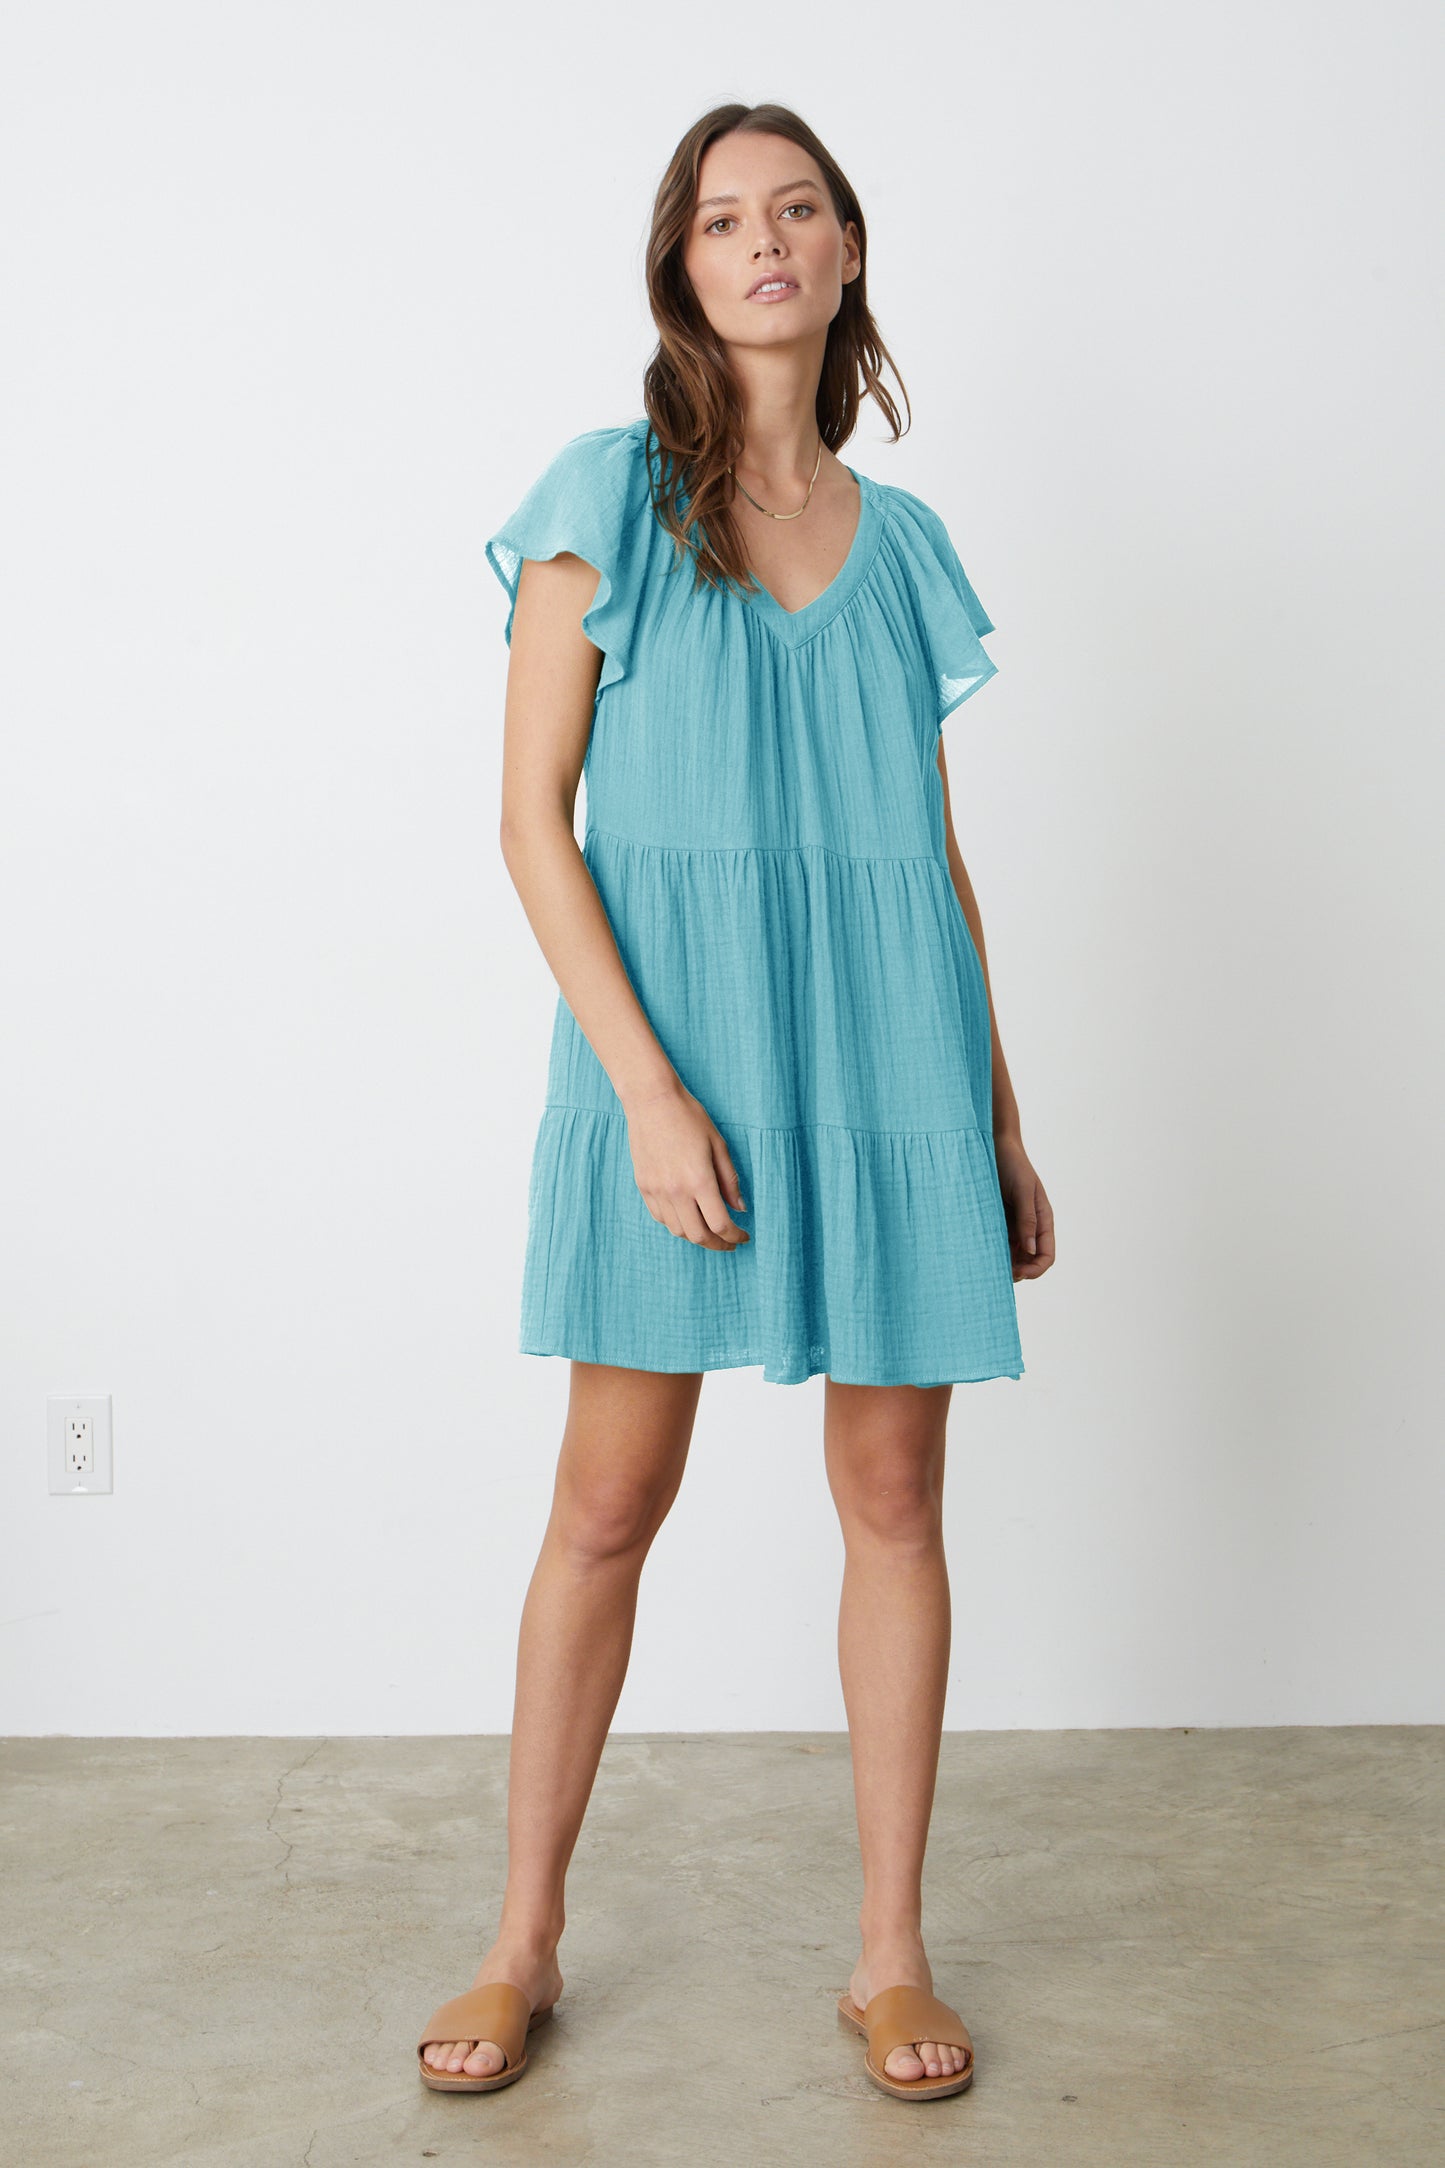 A model wearing a Velvet by Graham & Spencer ELEANOR COTTON GAUZE TIERED DRESS in aqua blue with sandals.-26577372283073